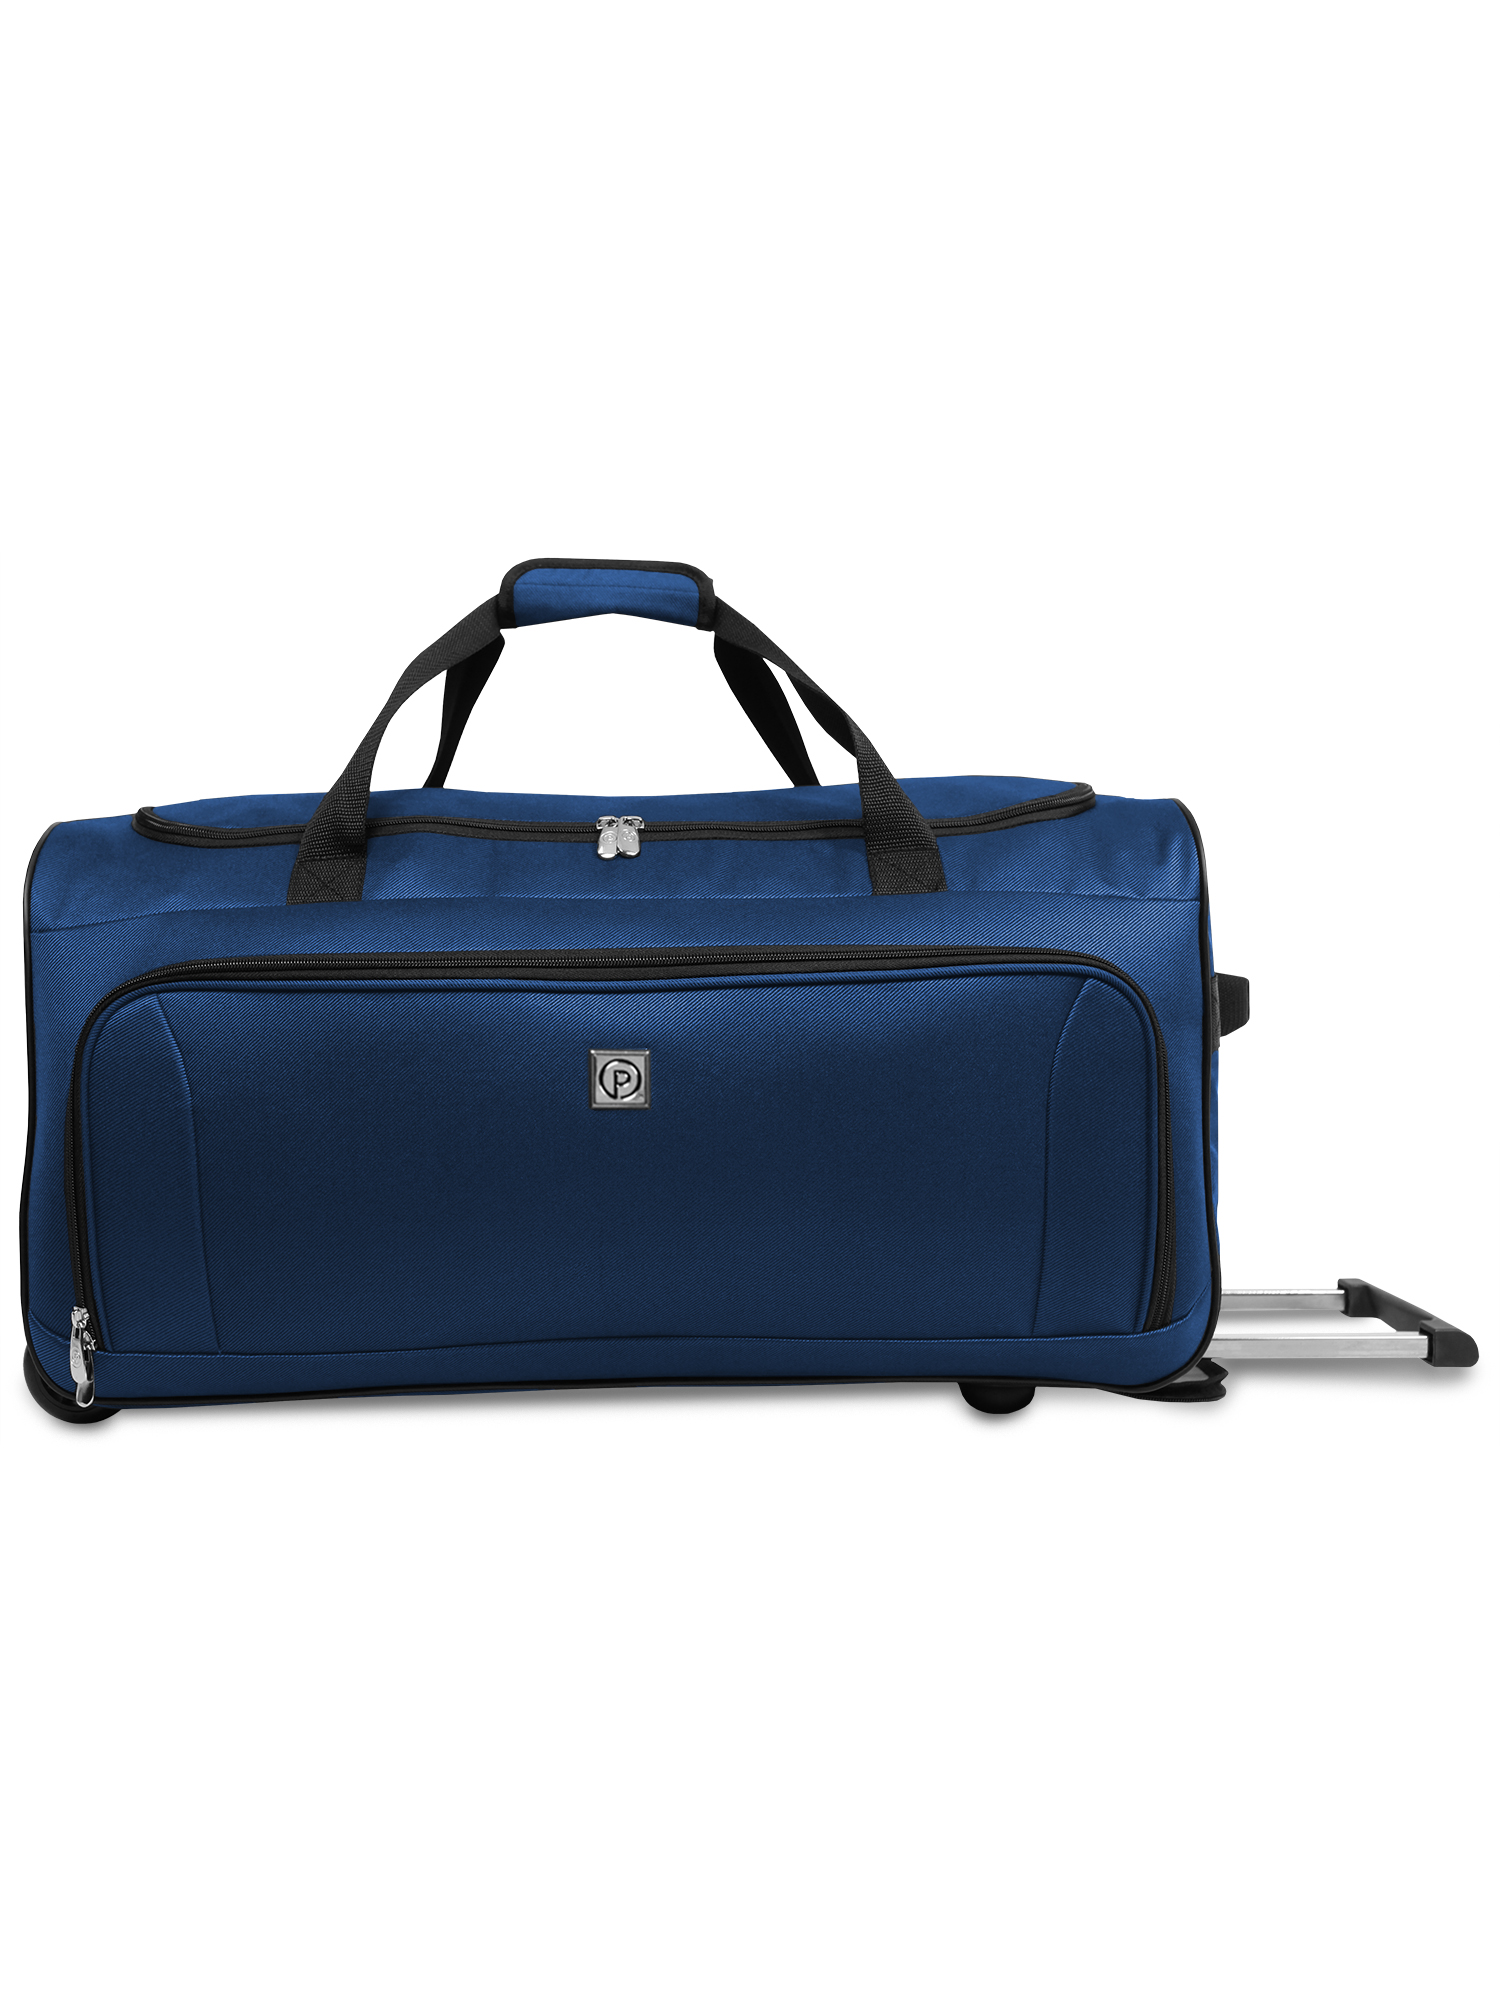 Protege 5 Piece Luggage Set w/ Carry on and Checked Bag, Blue (Online Only) - image 5 of 12